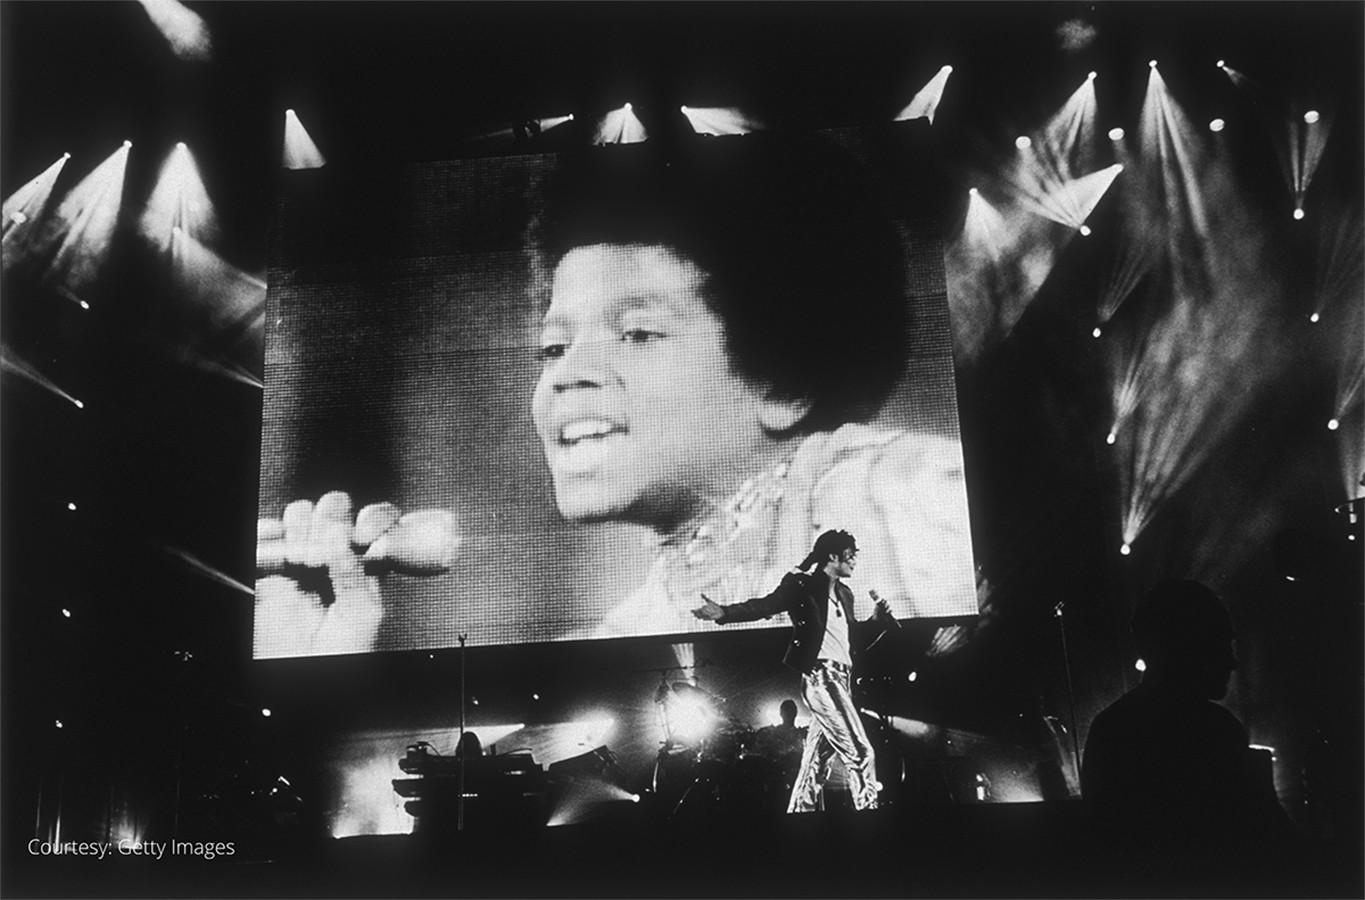 Michael Jackson performs on stage during his HIStory World Tour.